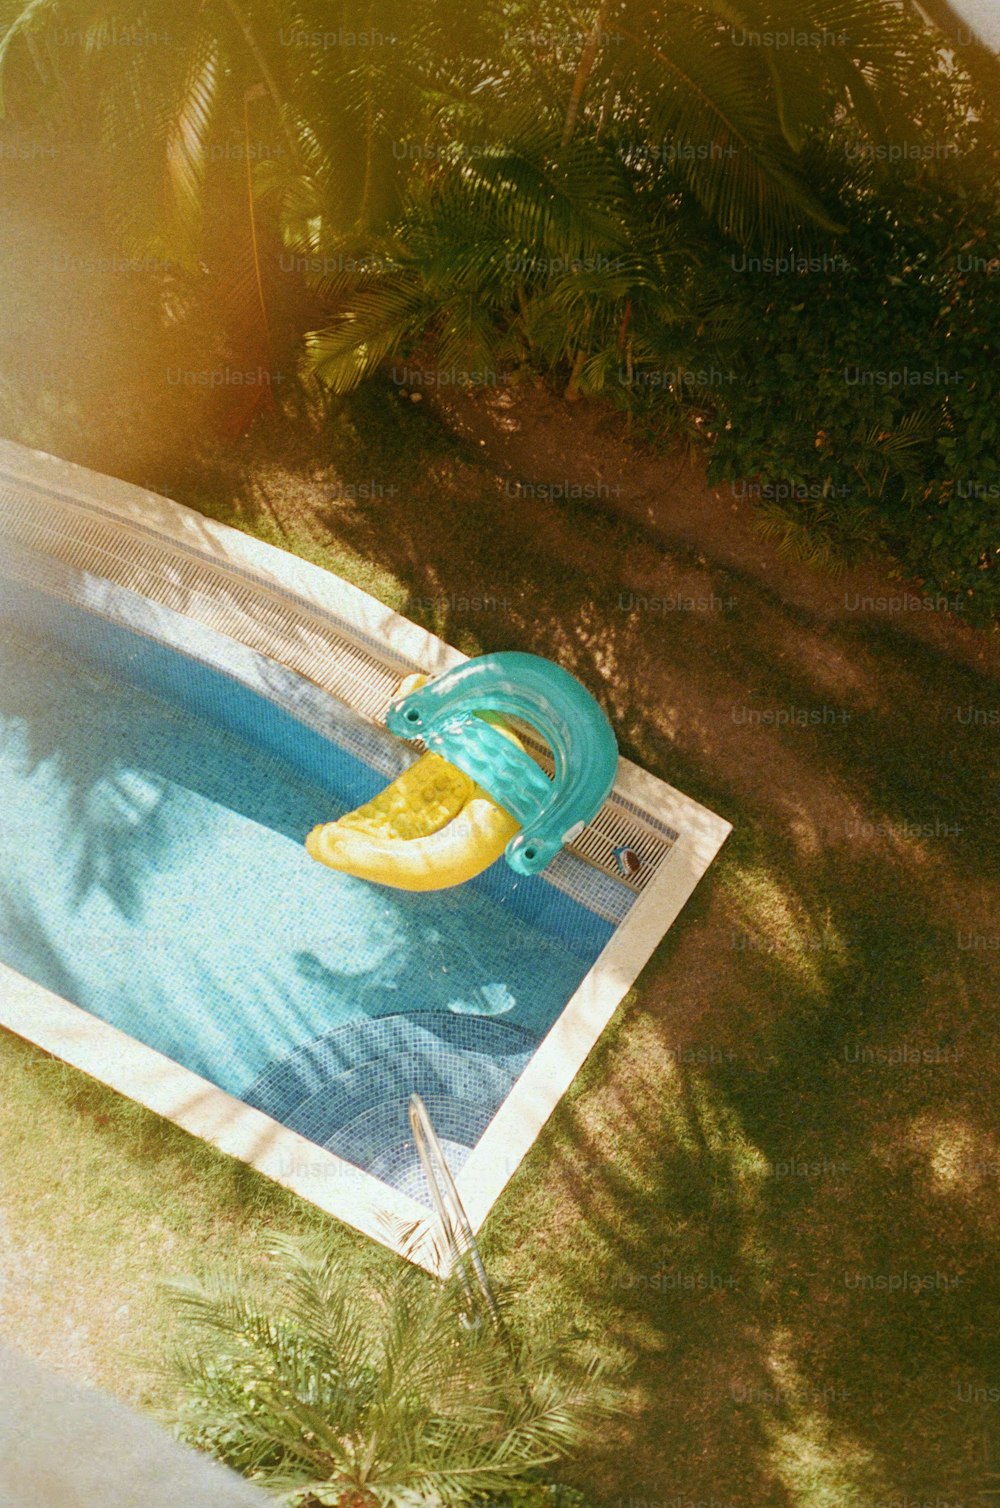 a banana floating in a pool with a blue cover